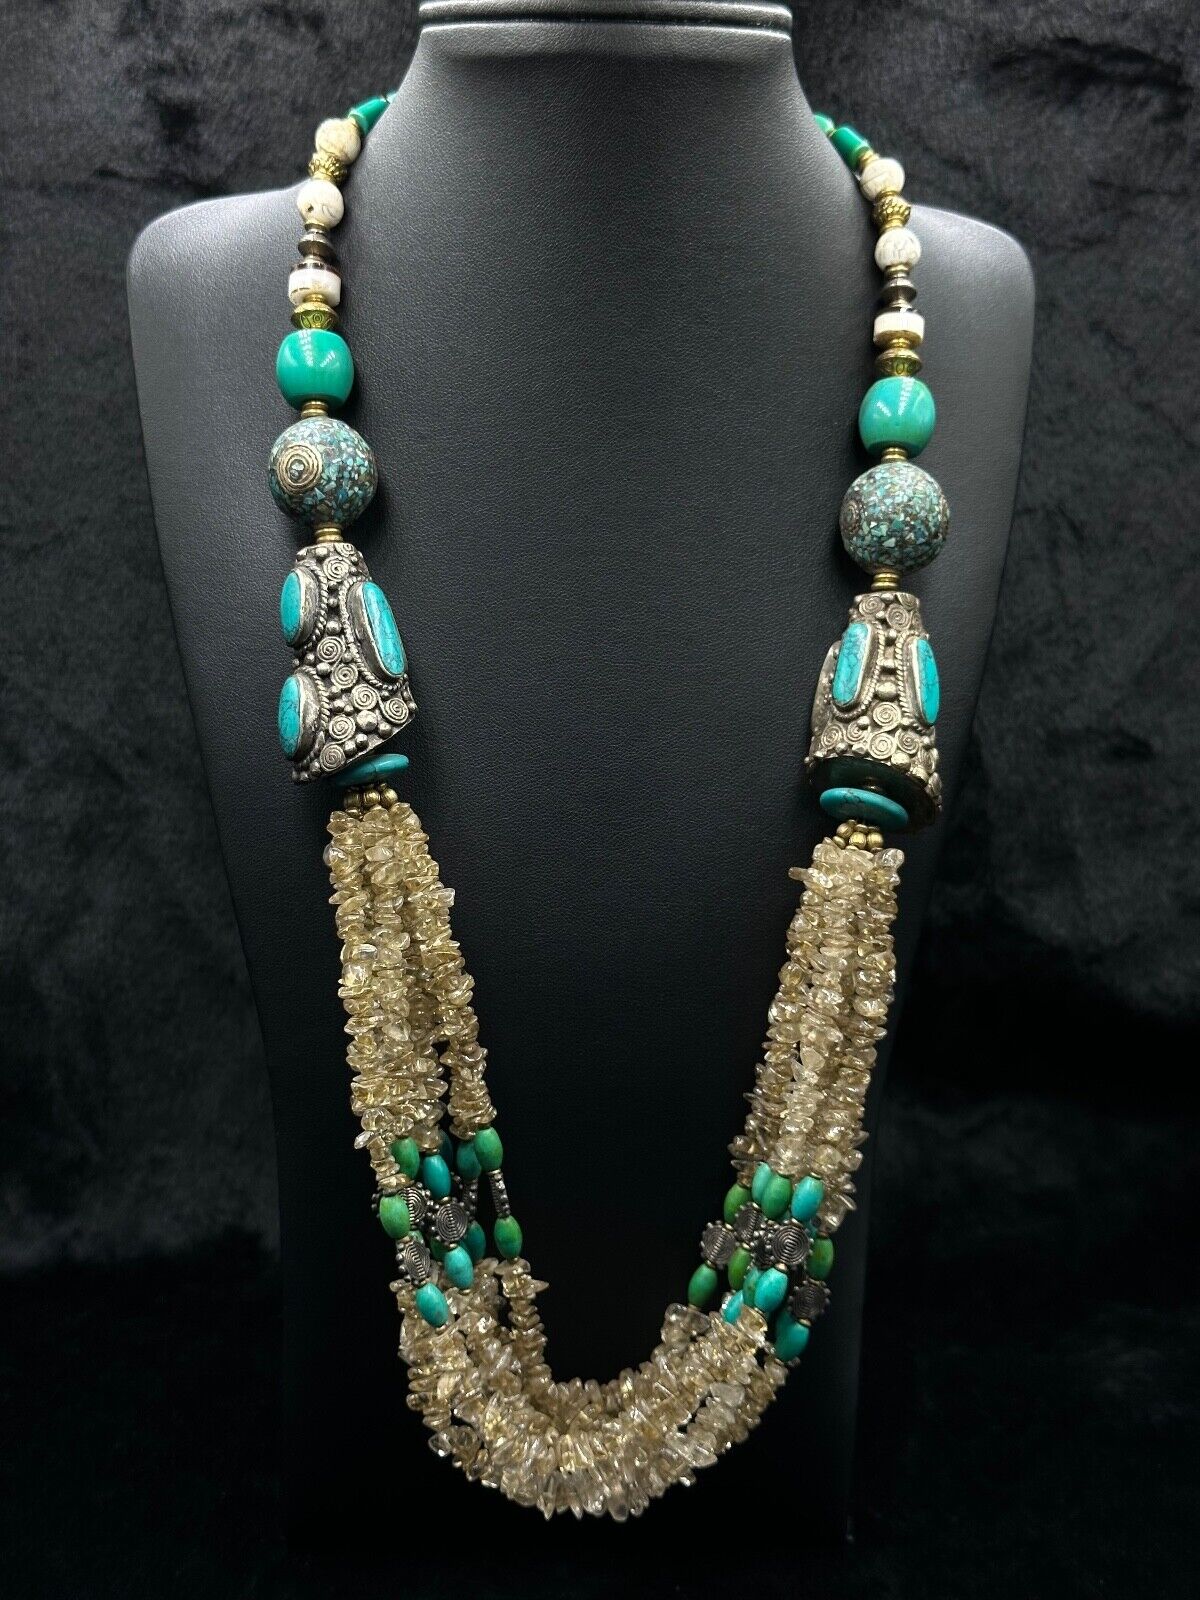 Tibetan Handmade Unique Design Old Necklace With Natural Turquoise Crystal Stone